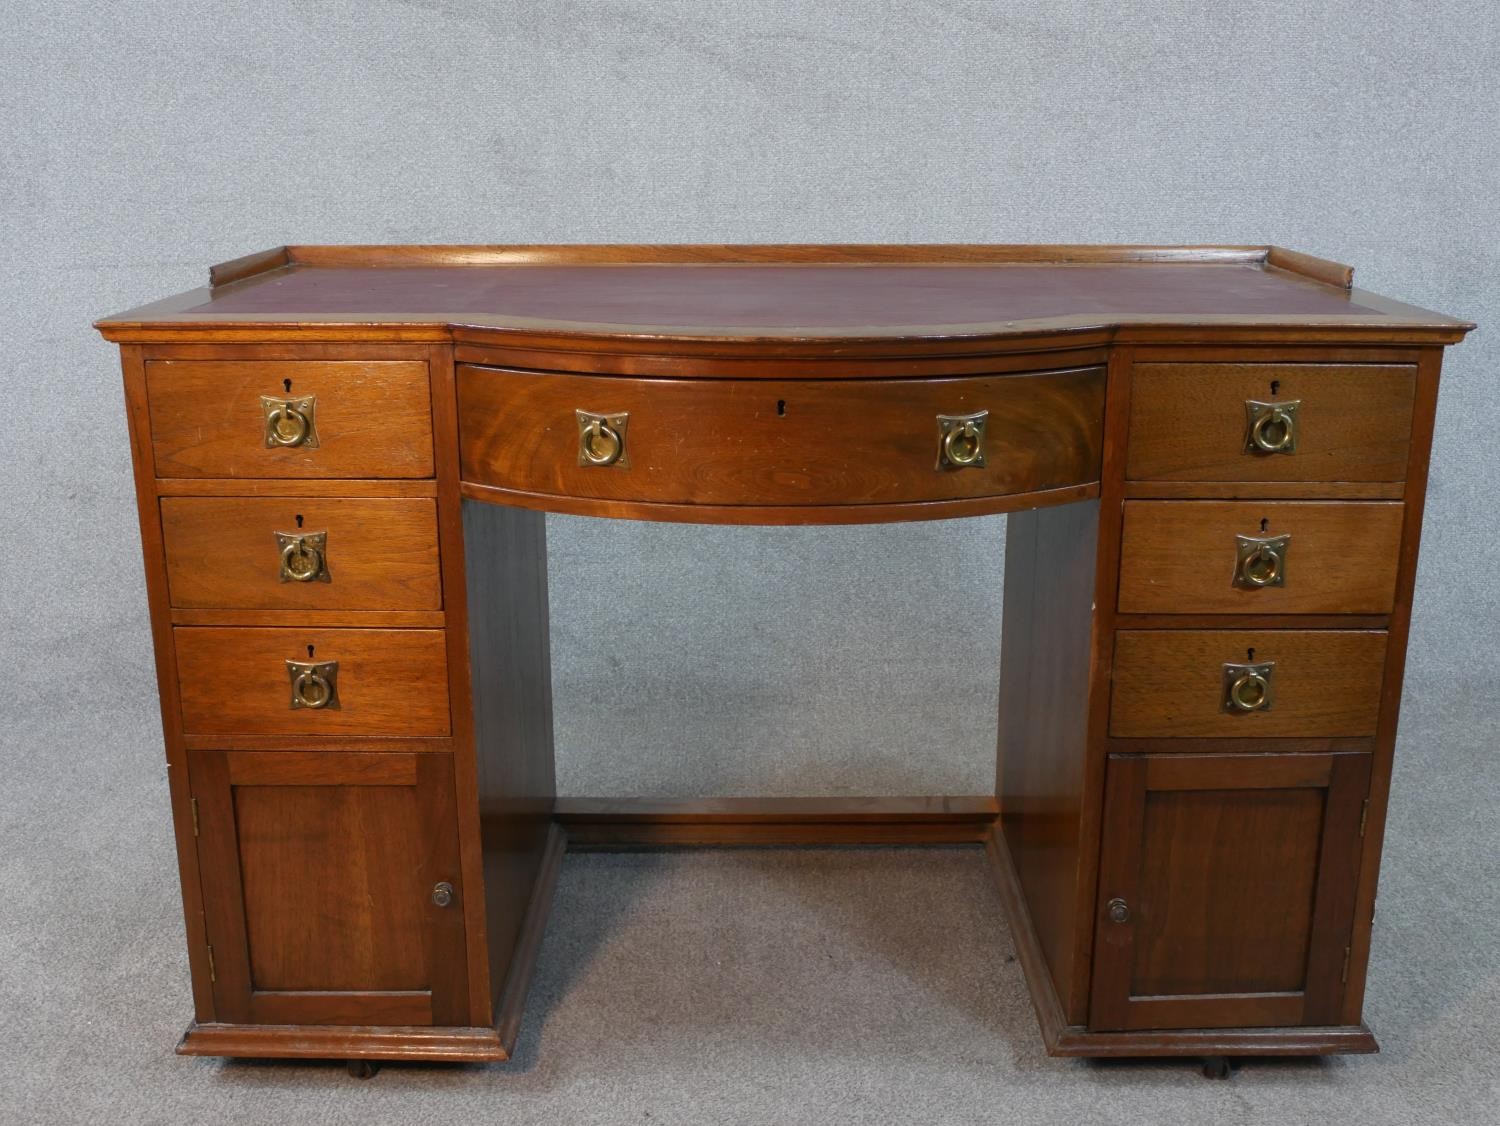 A late 19th century mahogany pedestal desk with bowfronted centre section above drawers and